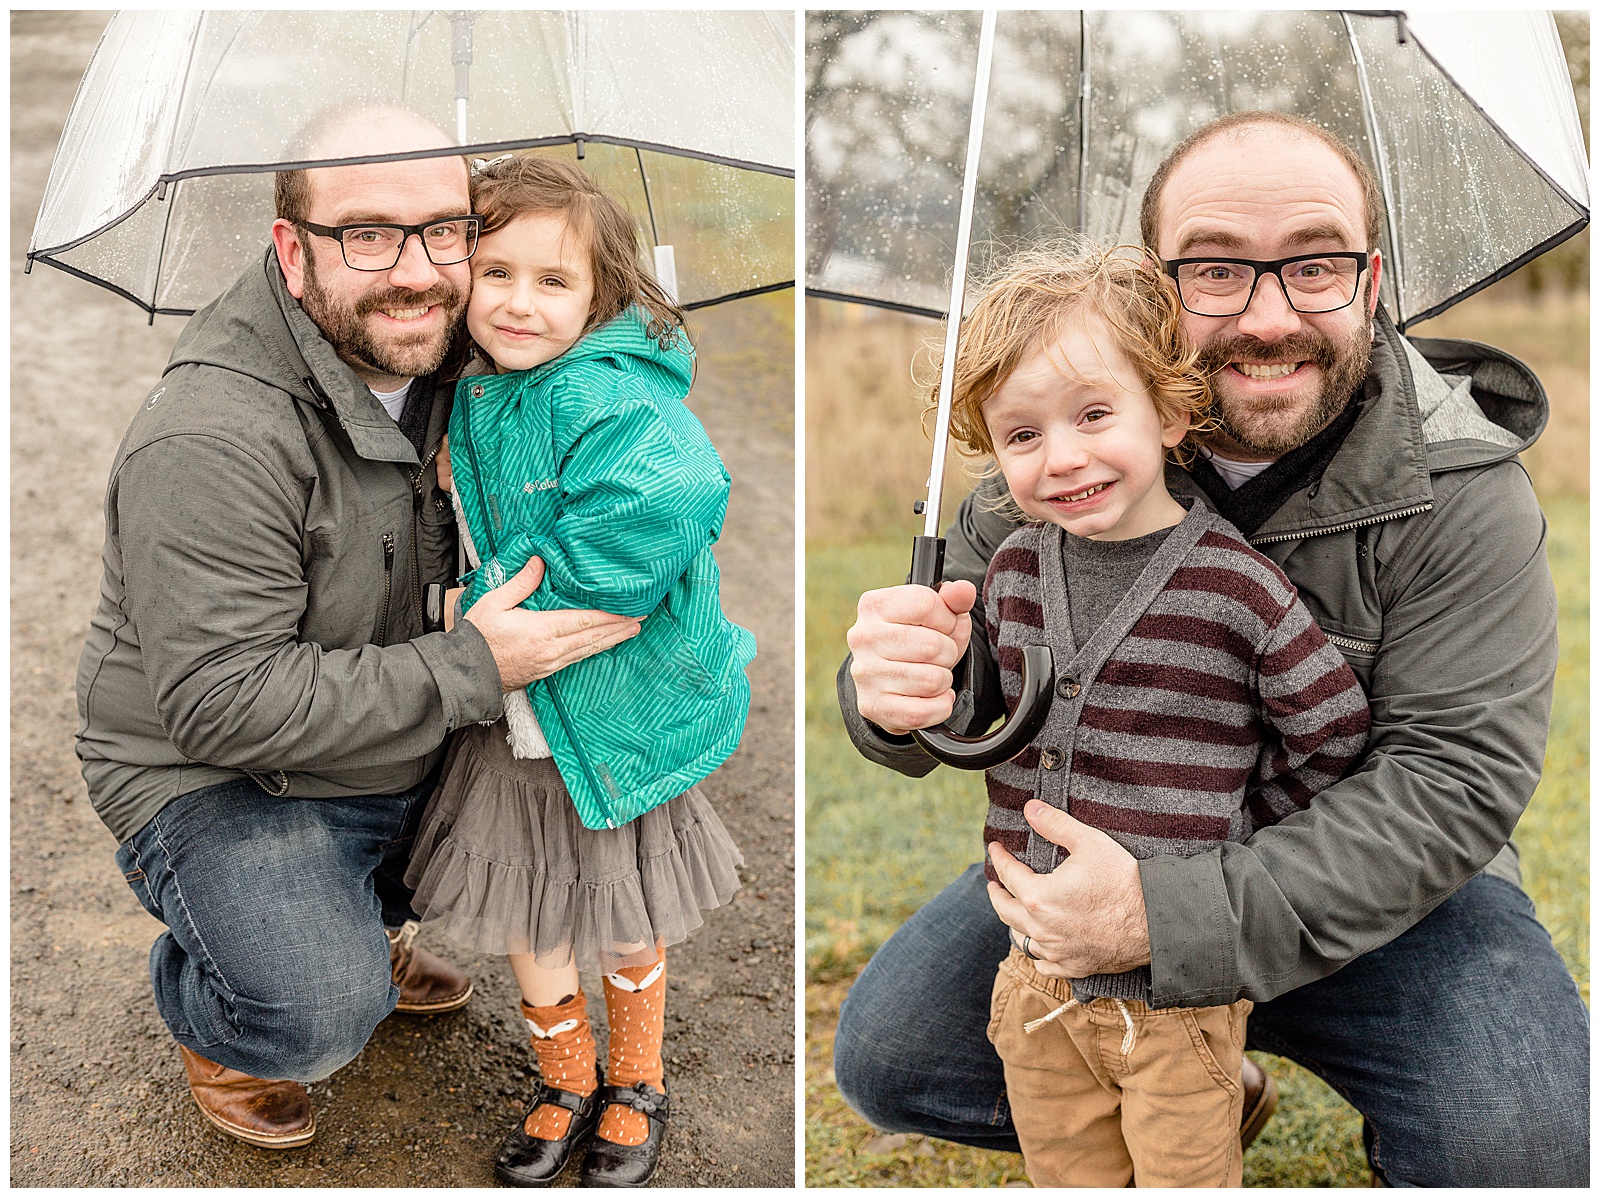 Dad with daughter, dad with son, out in the rain holding a clear umbrella